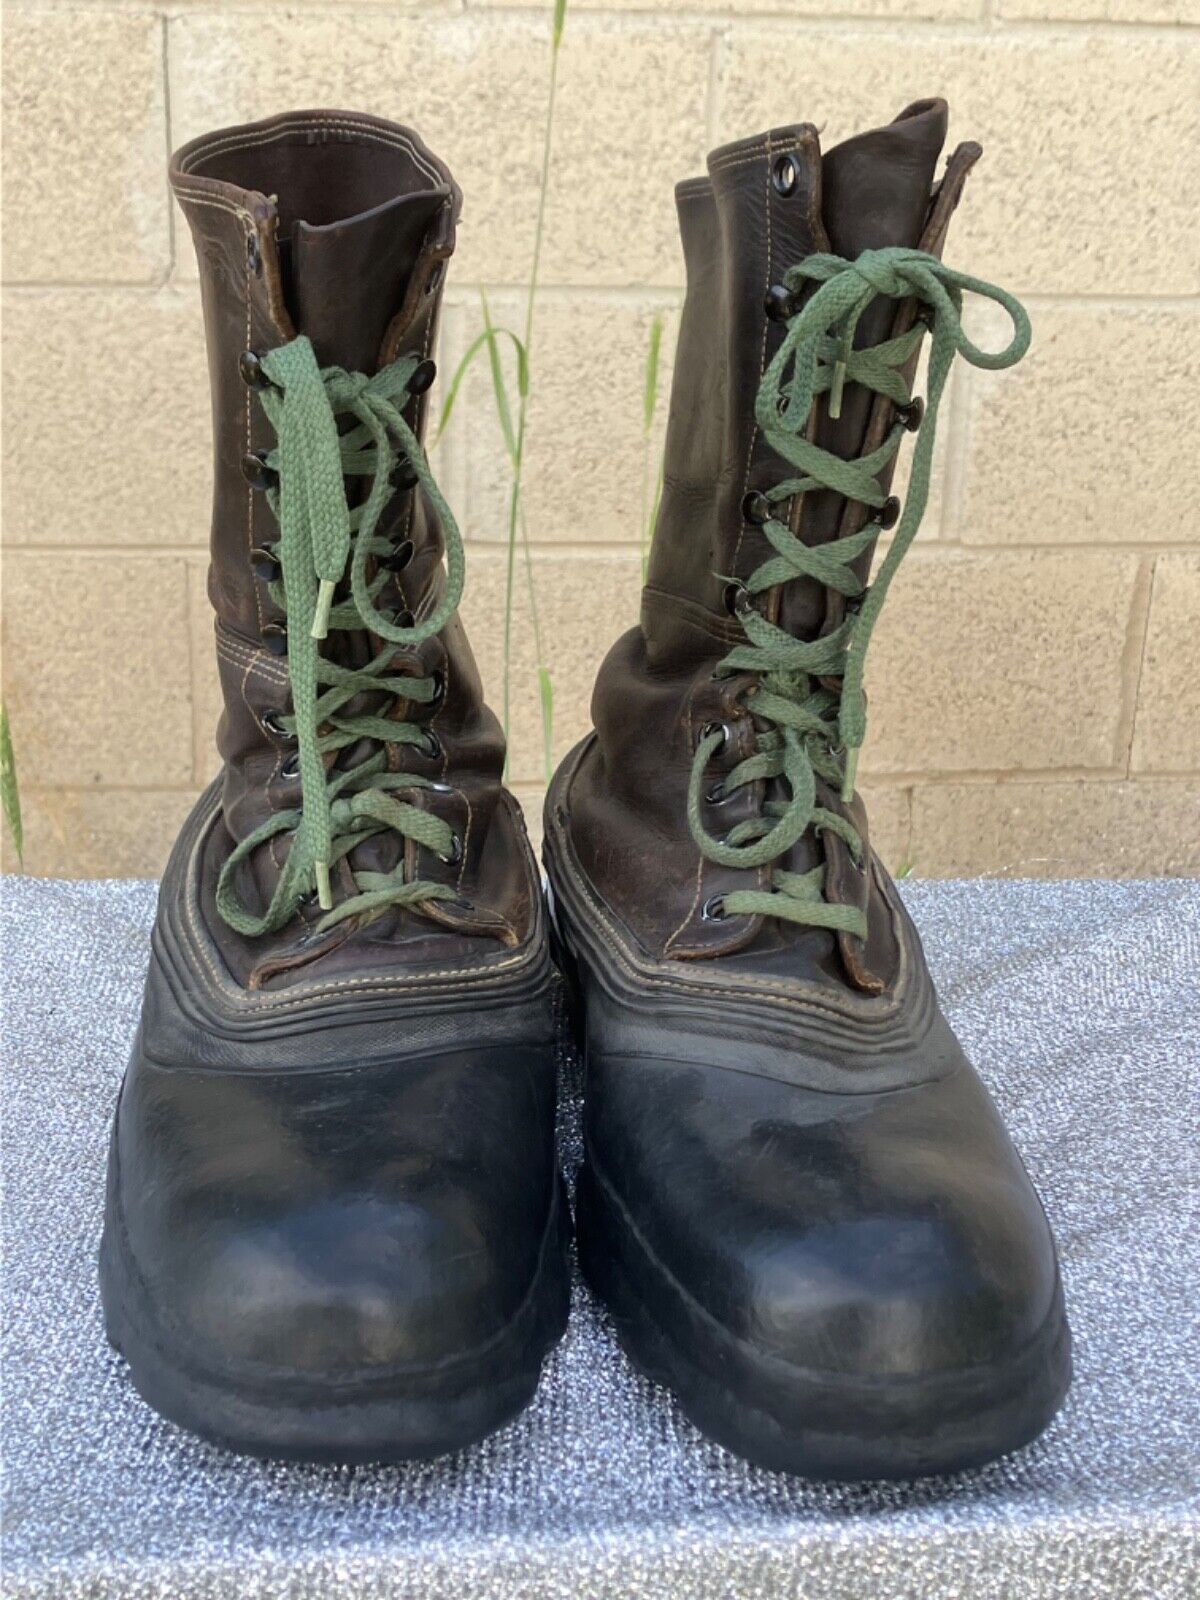 US Rubber Co. vtg size 11 ww2 wwii extreme cold weather leather boots US Army